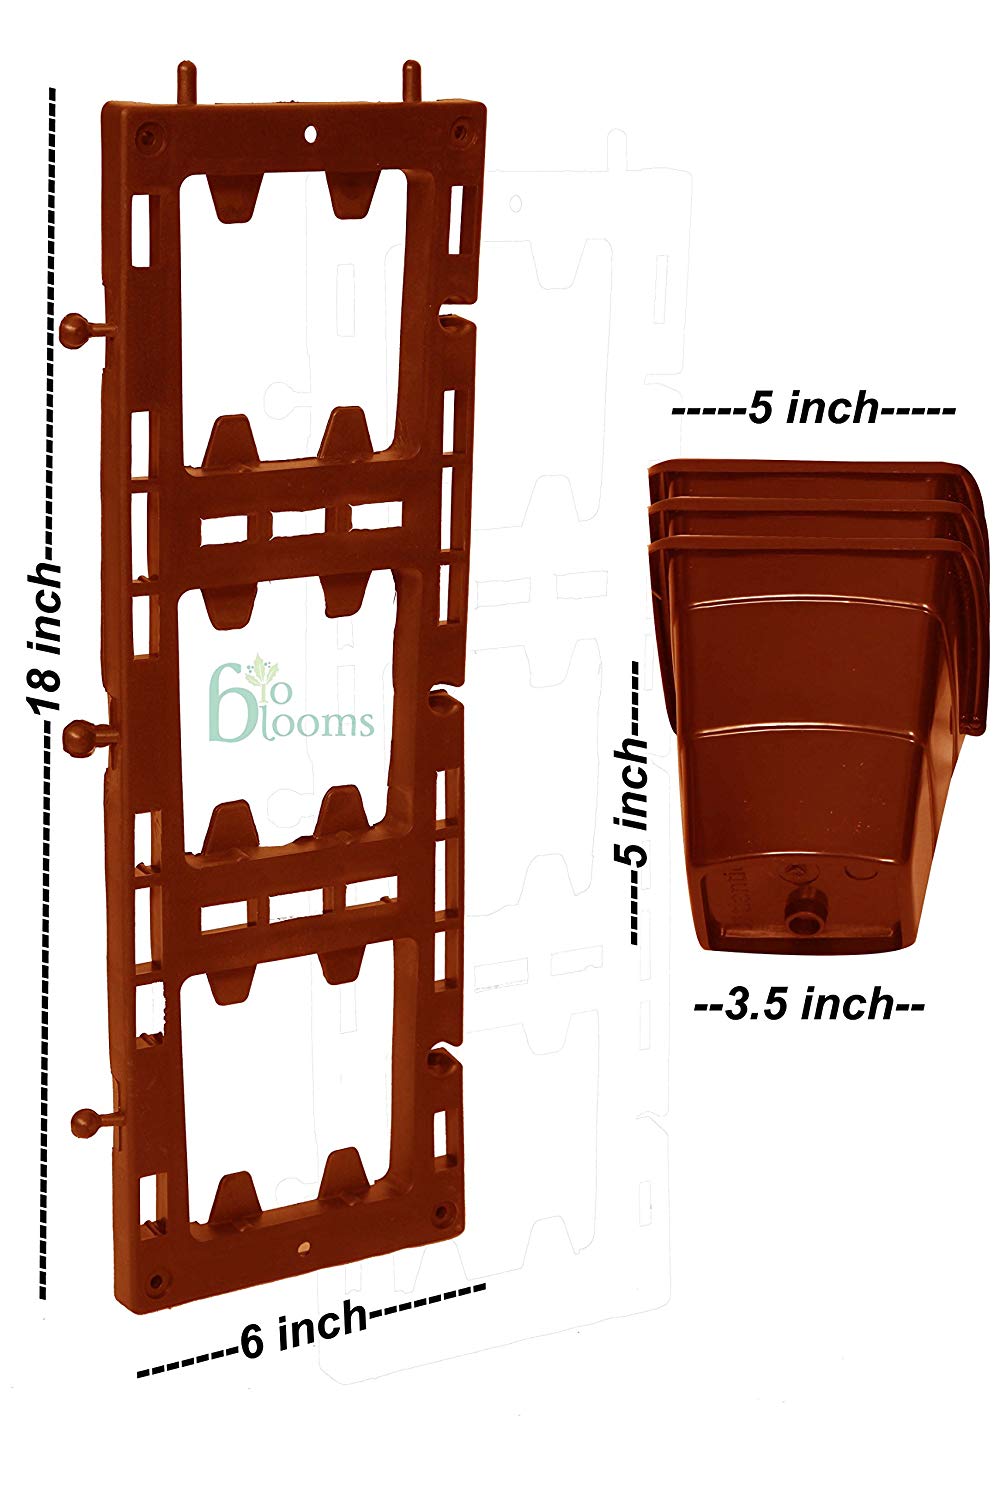 Home Garden Vertical panel set M1 model (Brown) /No courier only in parcel service